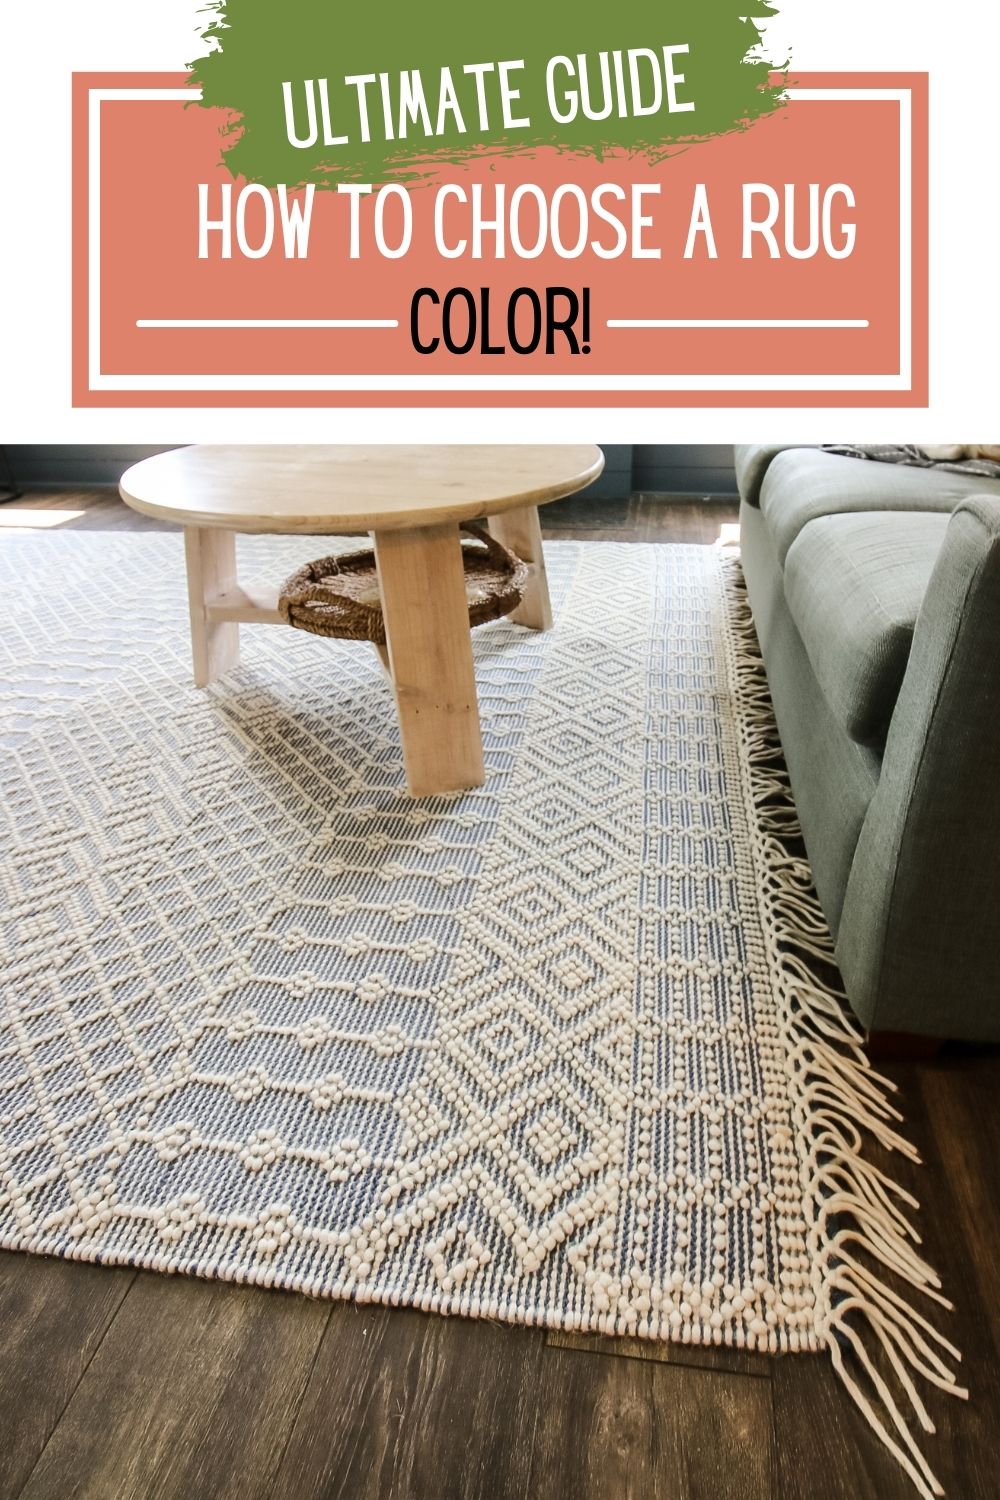 How To Choose A Rug Color, Choosing A Rug Color